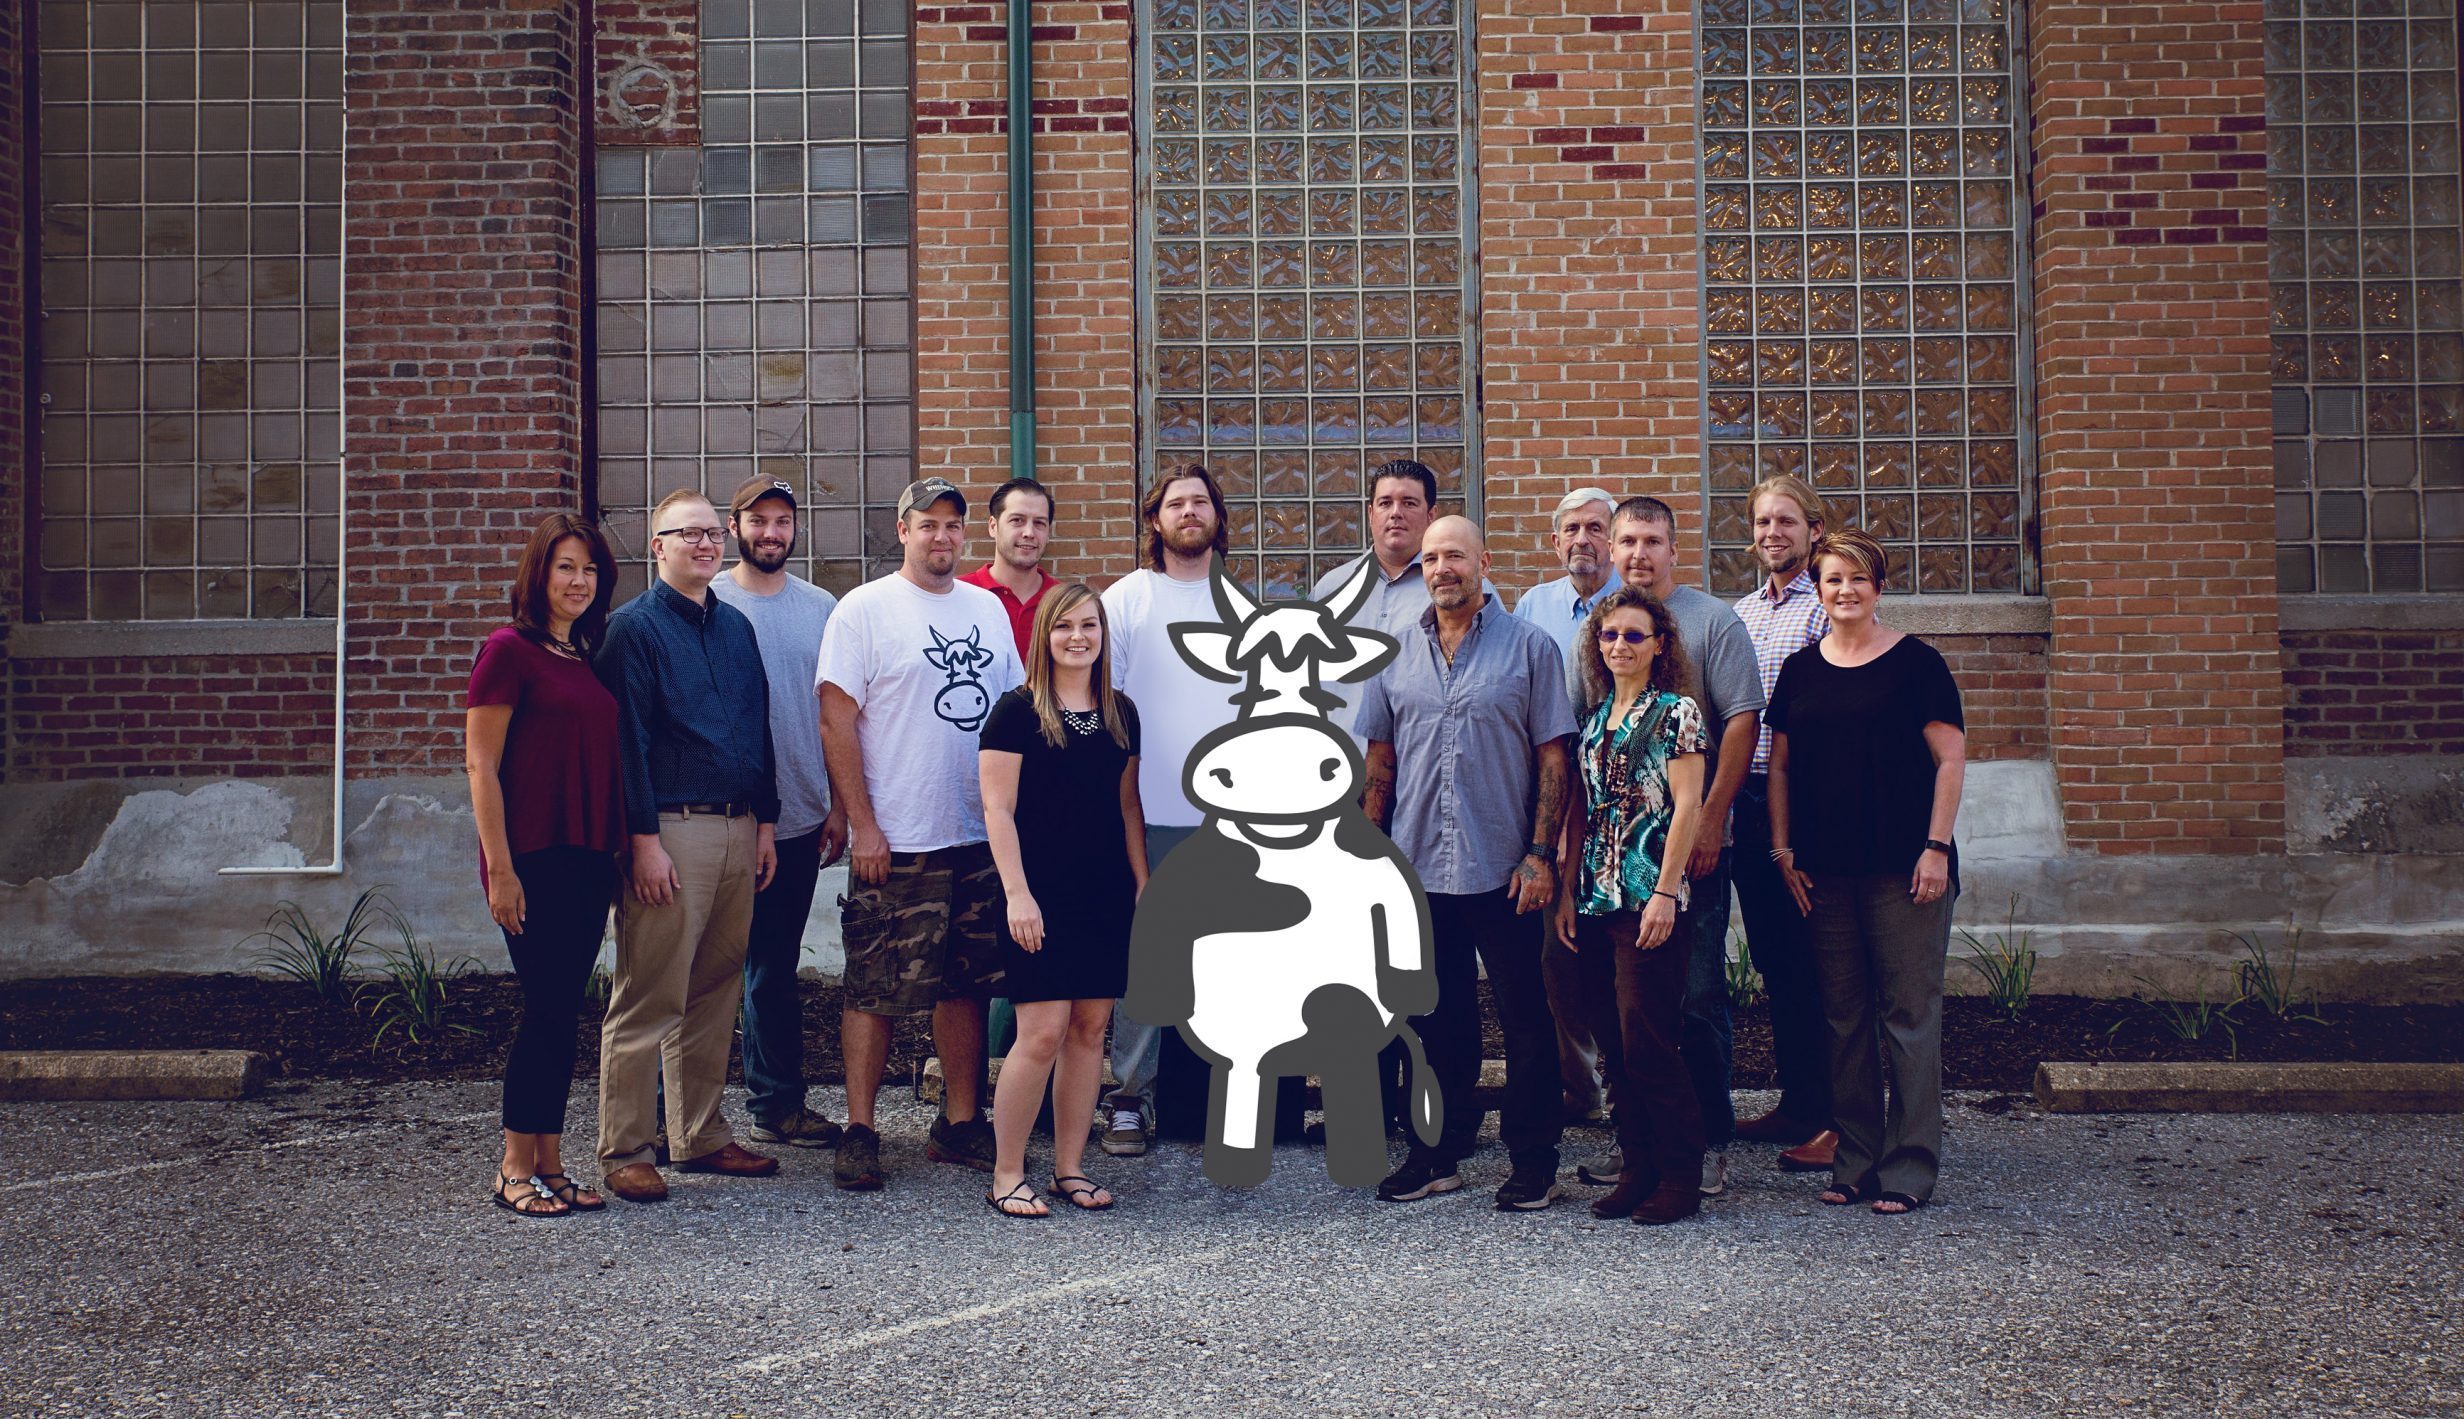 A team photo of the staff at American Micro Industries.